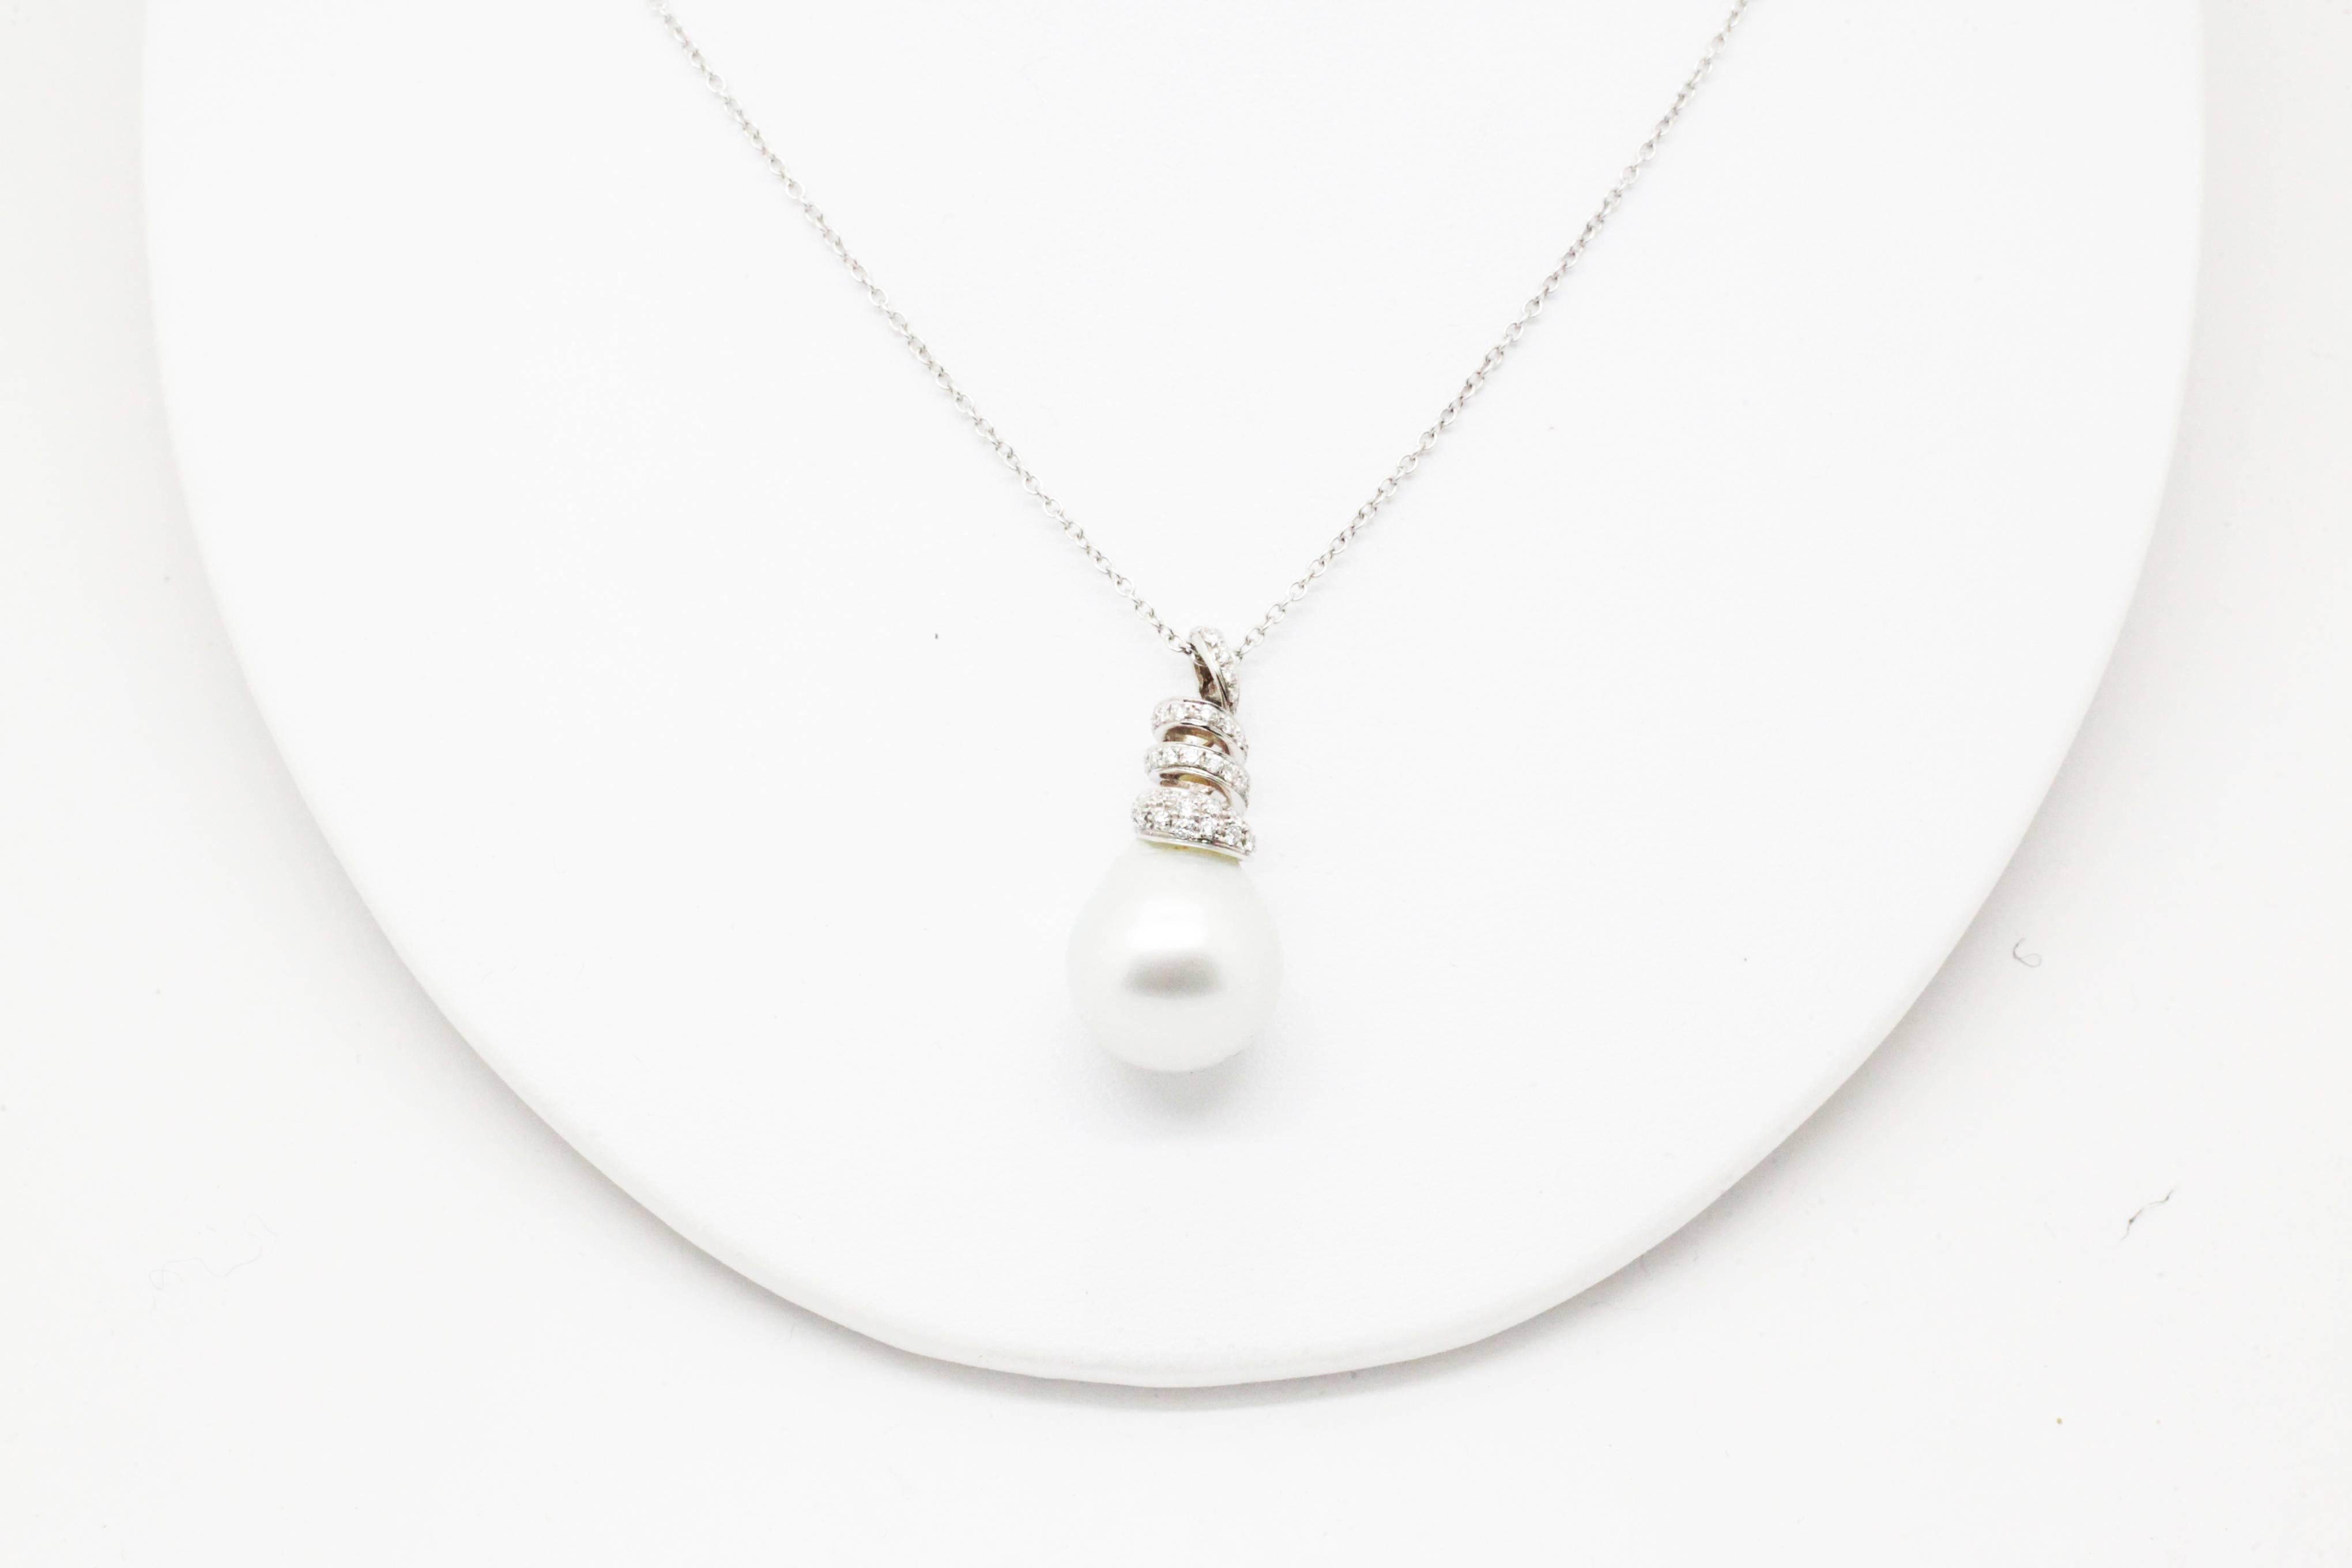 This FERRUCCI & CO. necklace, delicate and sophisticated, showcasing an Australian Pearl or rare beauty in a modern spiral design enhanced by white diamond pave'.

Elegant and classy for every day and chic for every evening, Made in Italy 
Entirely